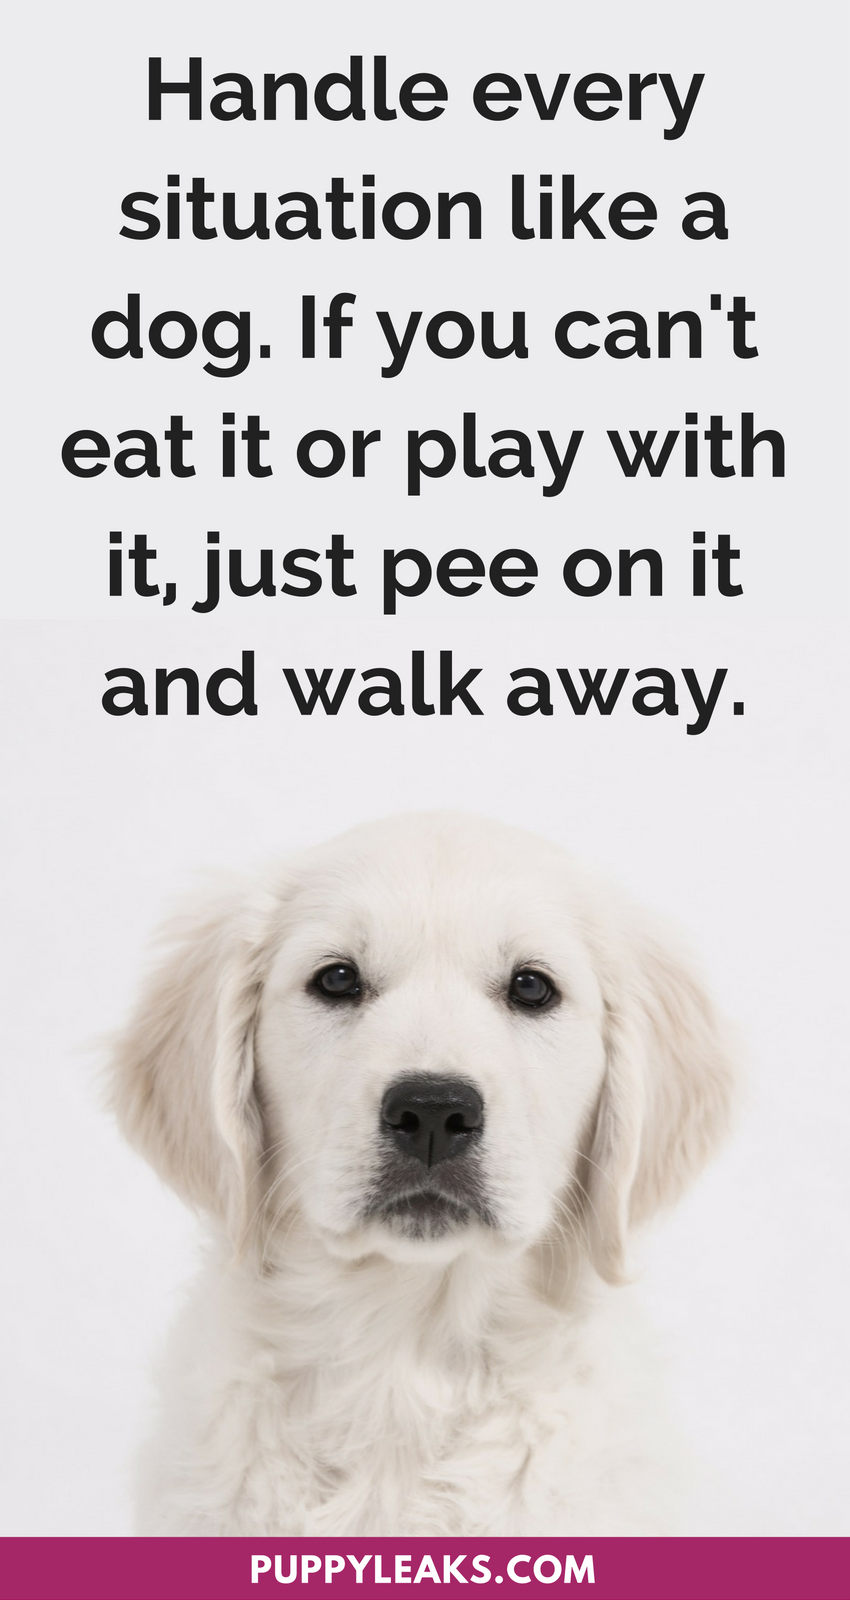 a good quote for a dog